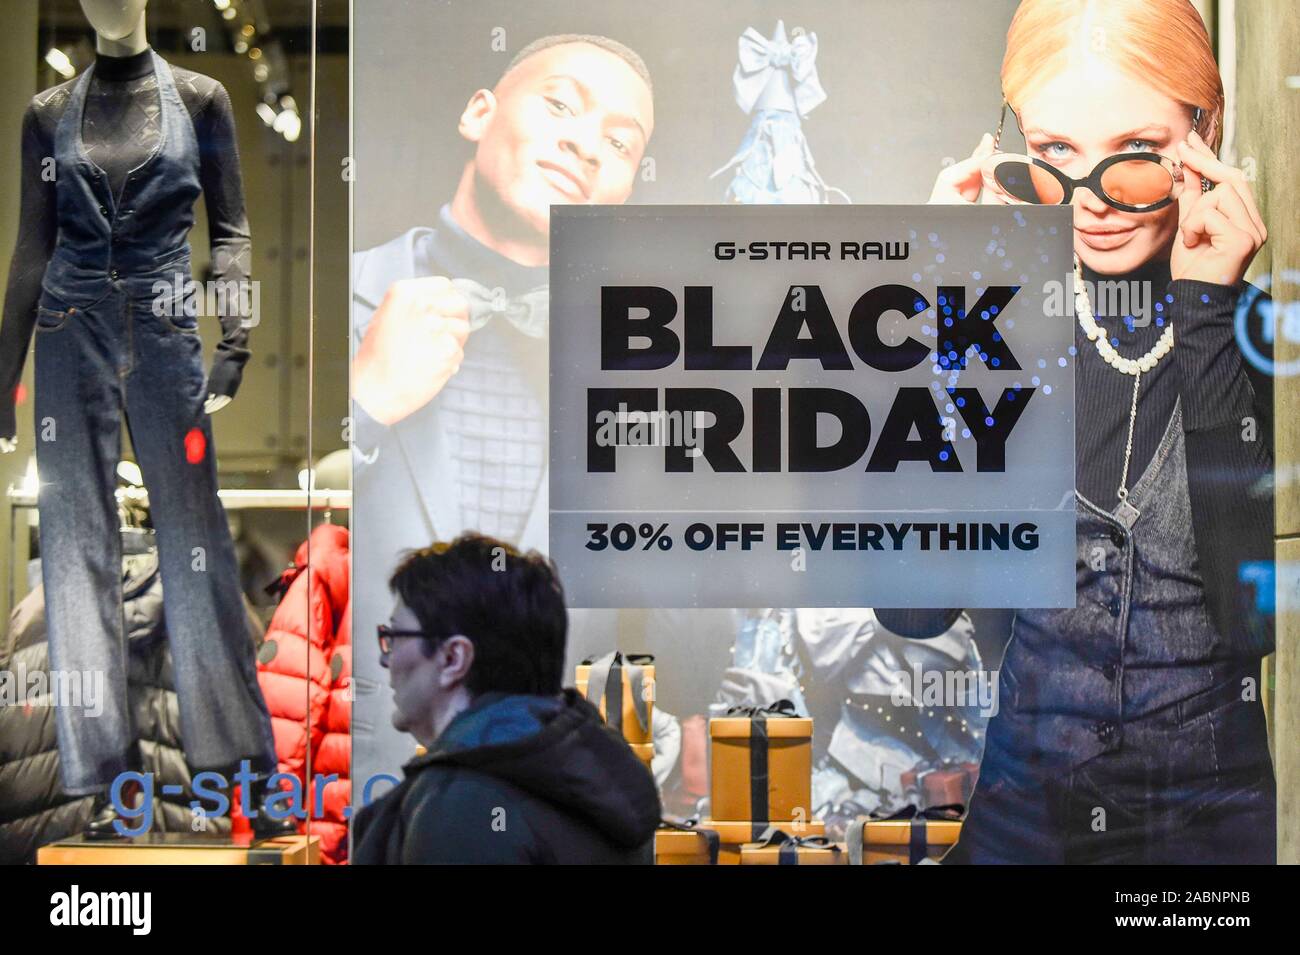 London, UK. 28 November 2019. A shopper outside the G-Star Raw store which  is promoting discounts in Oxford Street, the capital's busiest shopping  area, on the eve of Black Friday. The US